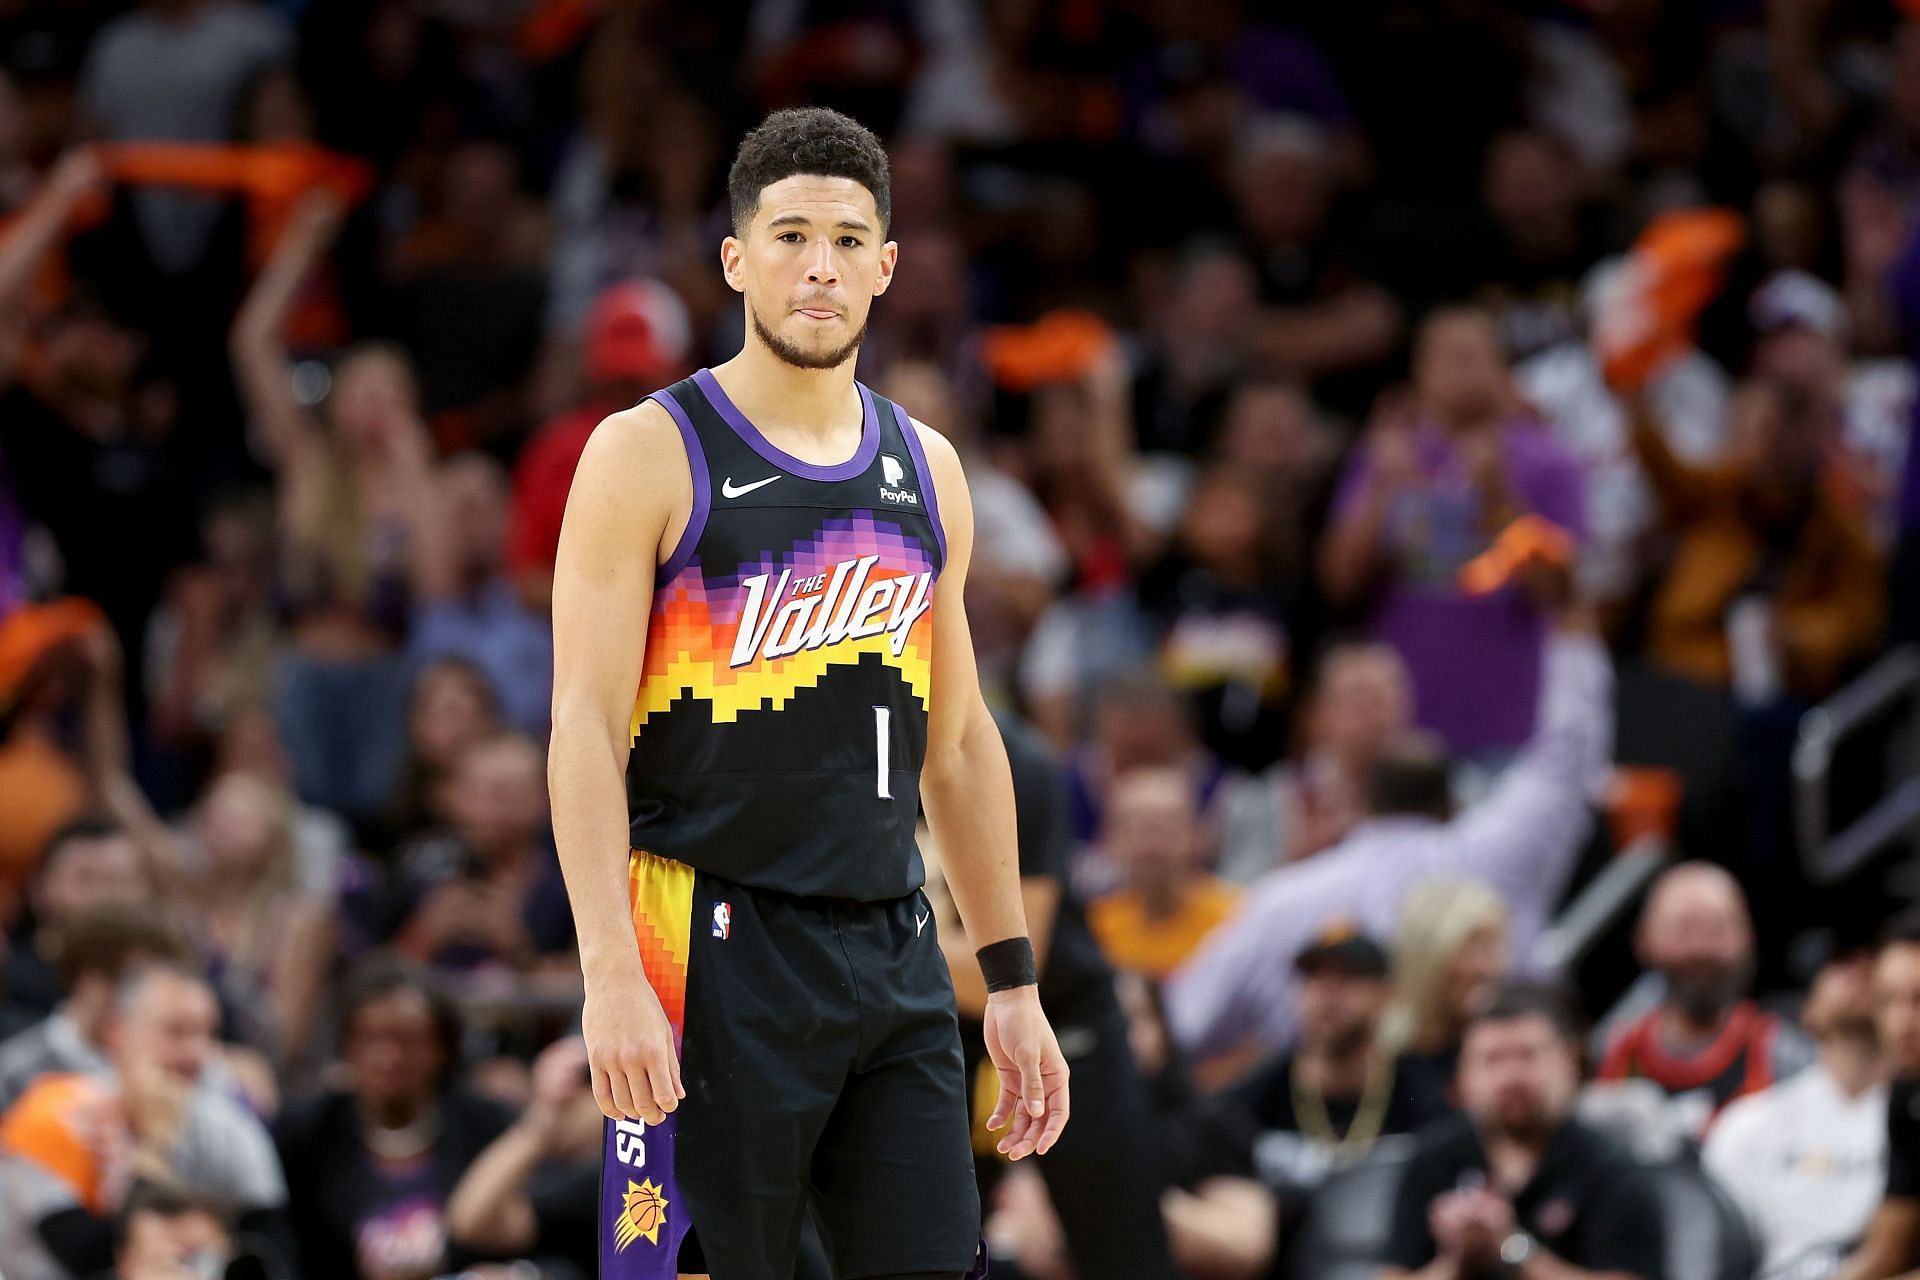 Devin Booker suffered a hamstring injury while on transition defense